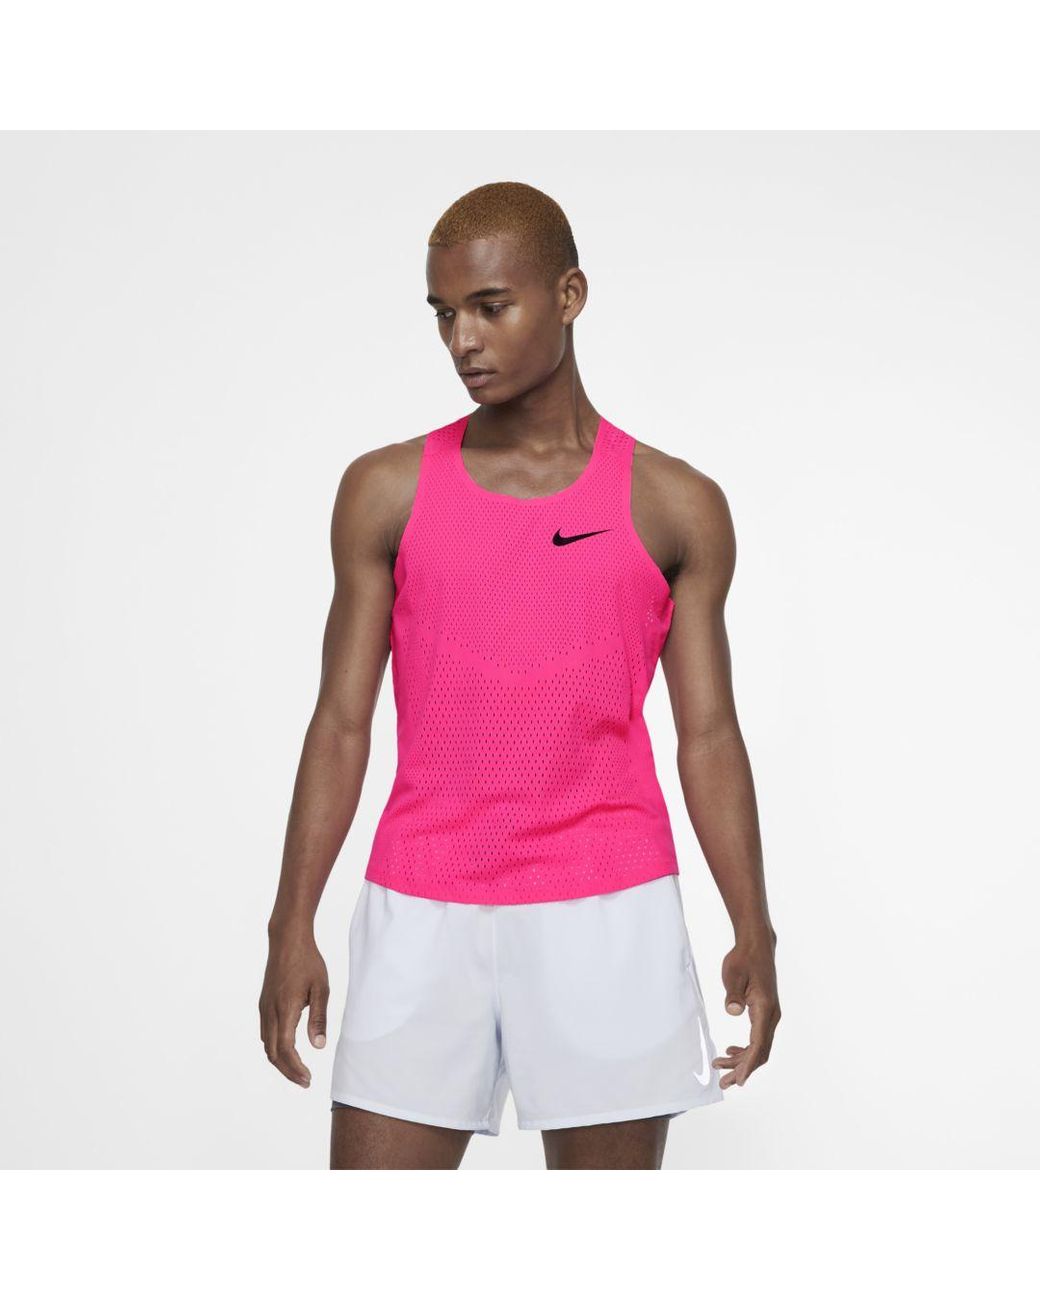 Aeroswift Running Singlet in Pink for |